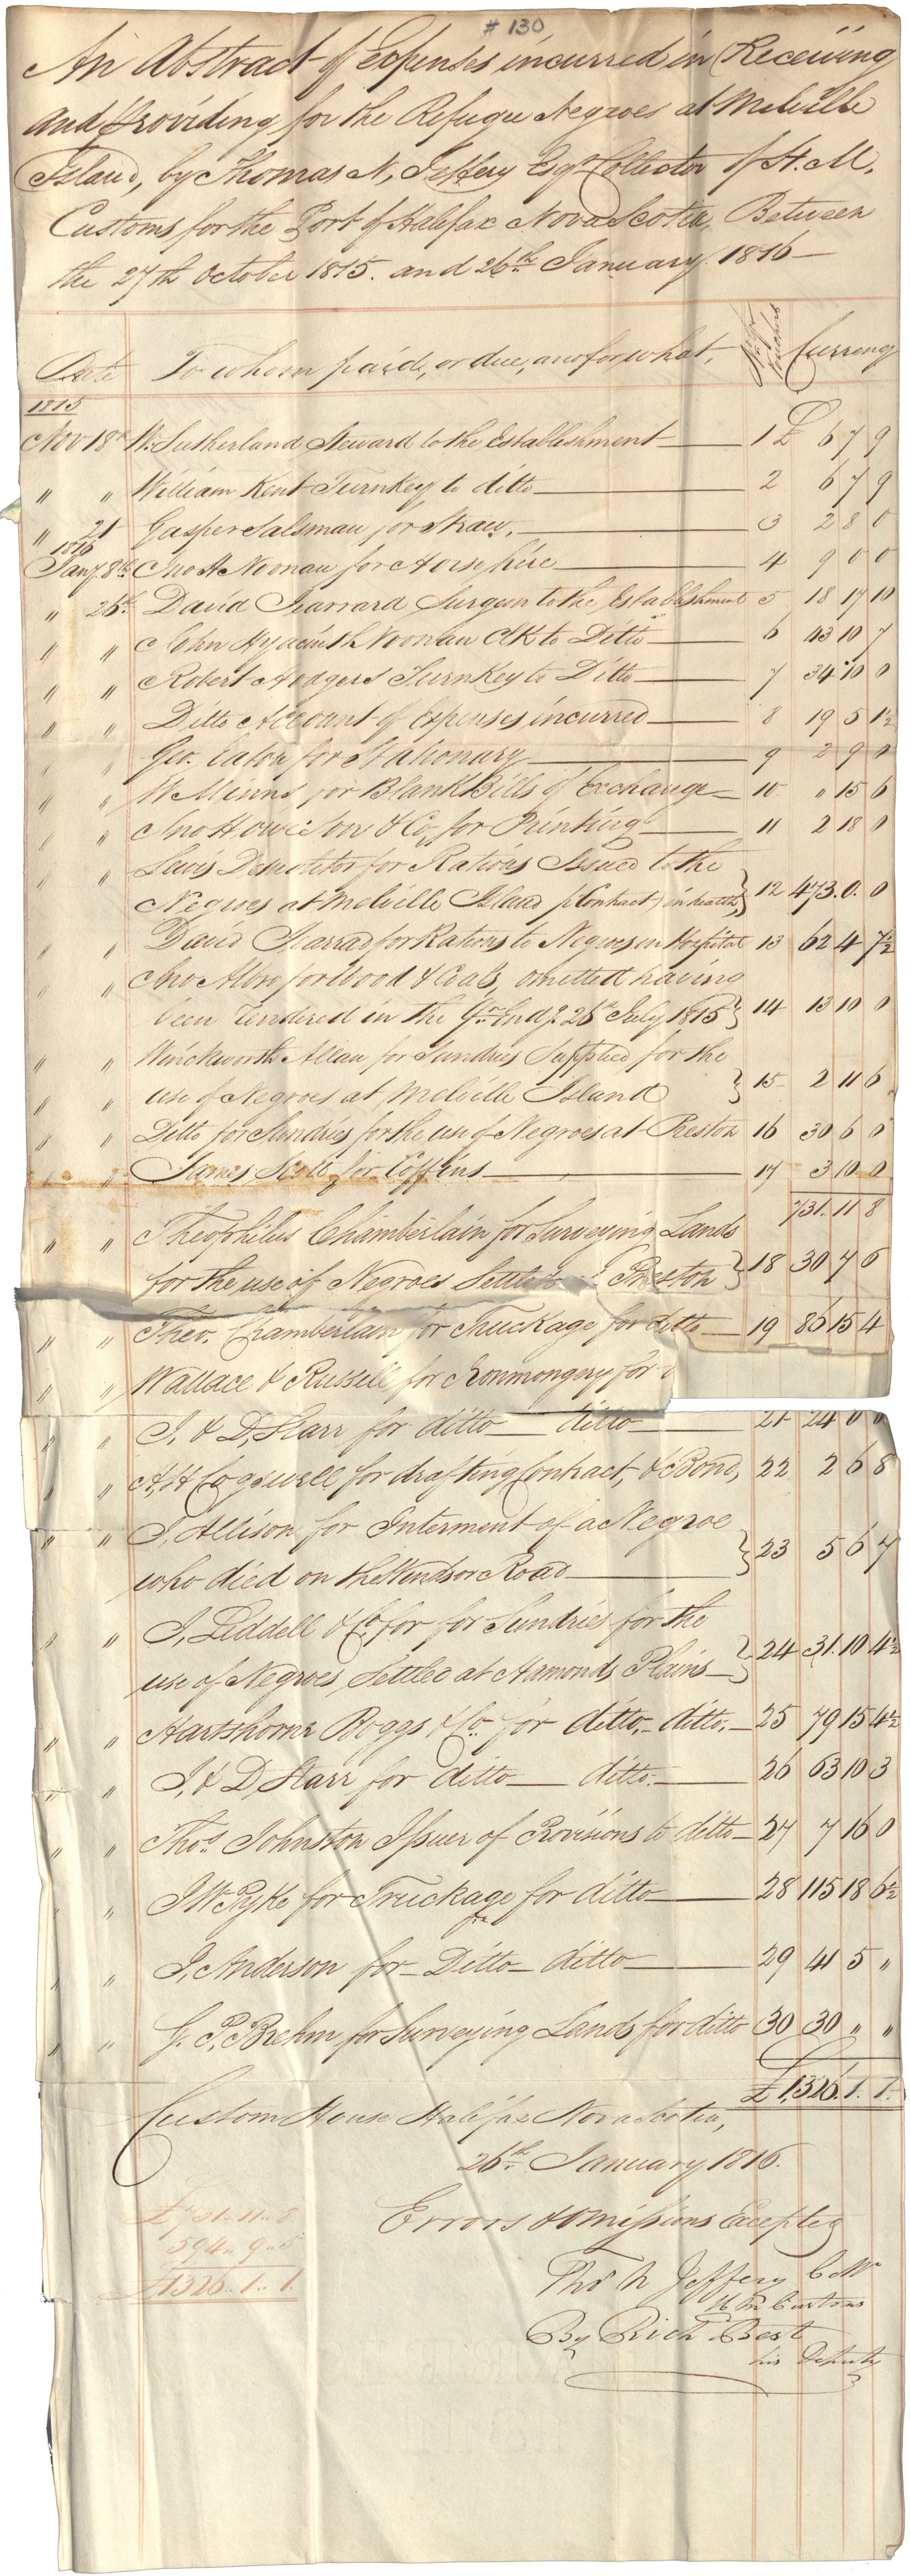 Abstract of expenses for receiving and providing for the Black Refugees at Melville Island between 27 October 1815 and 26 January 1816